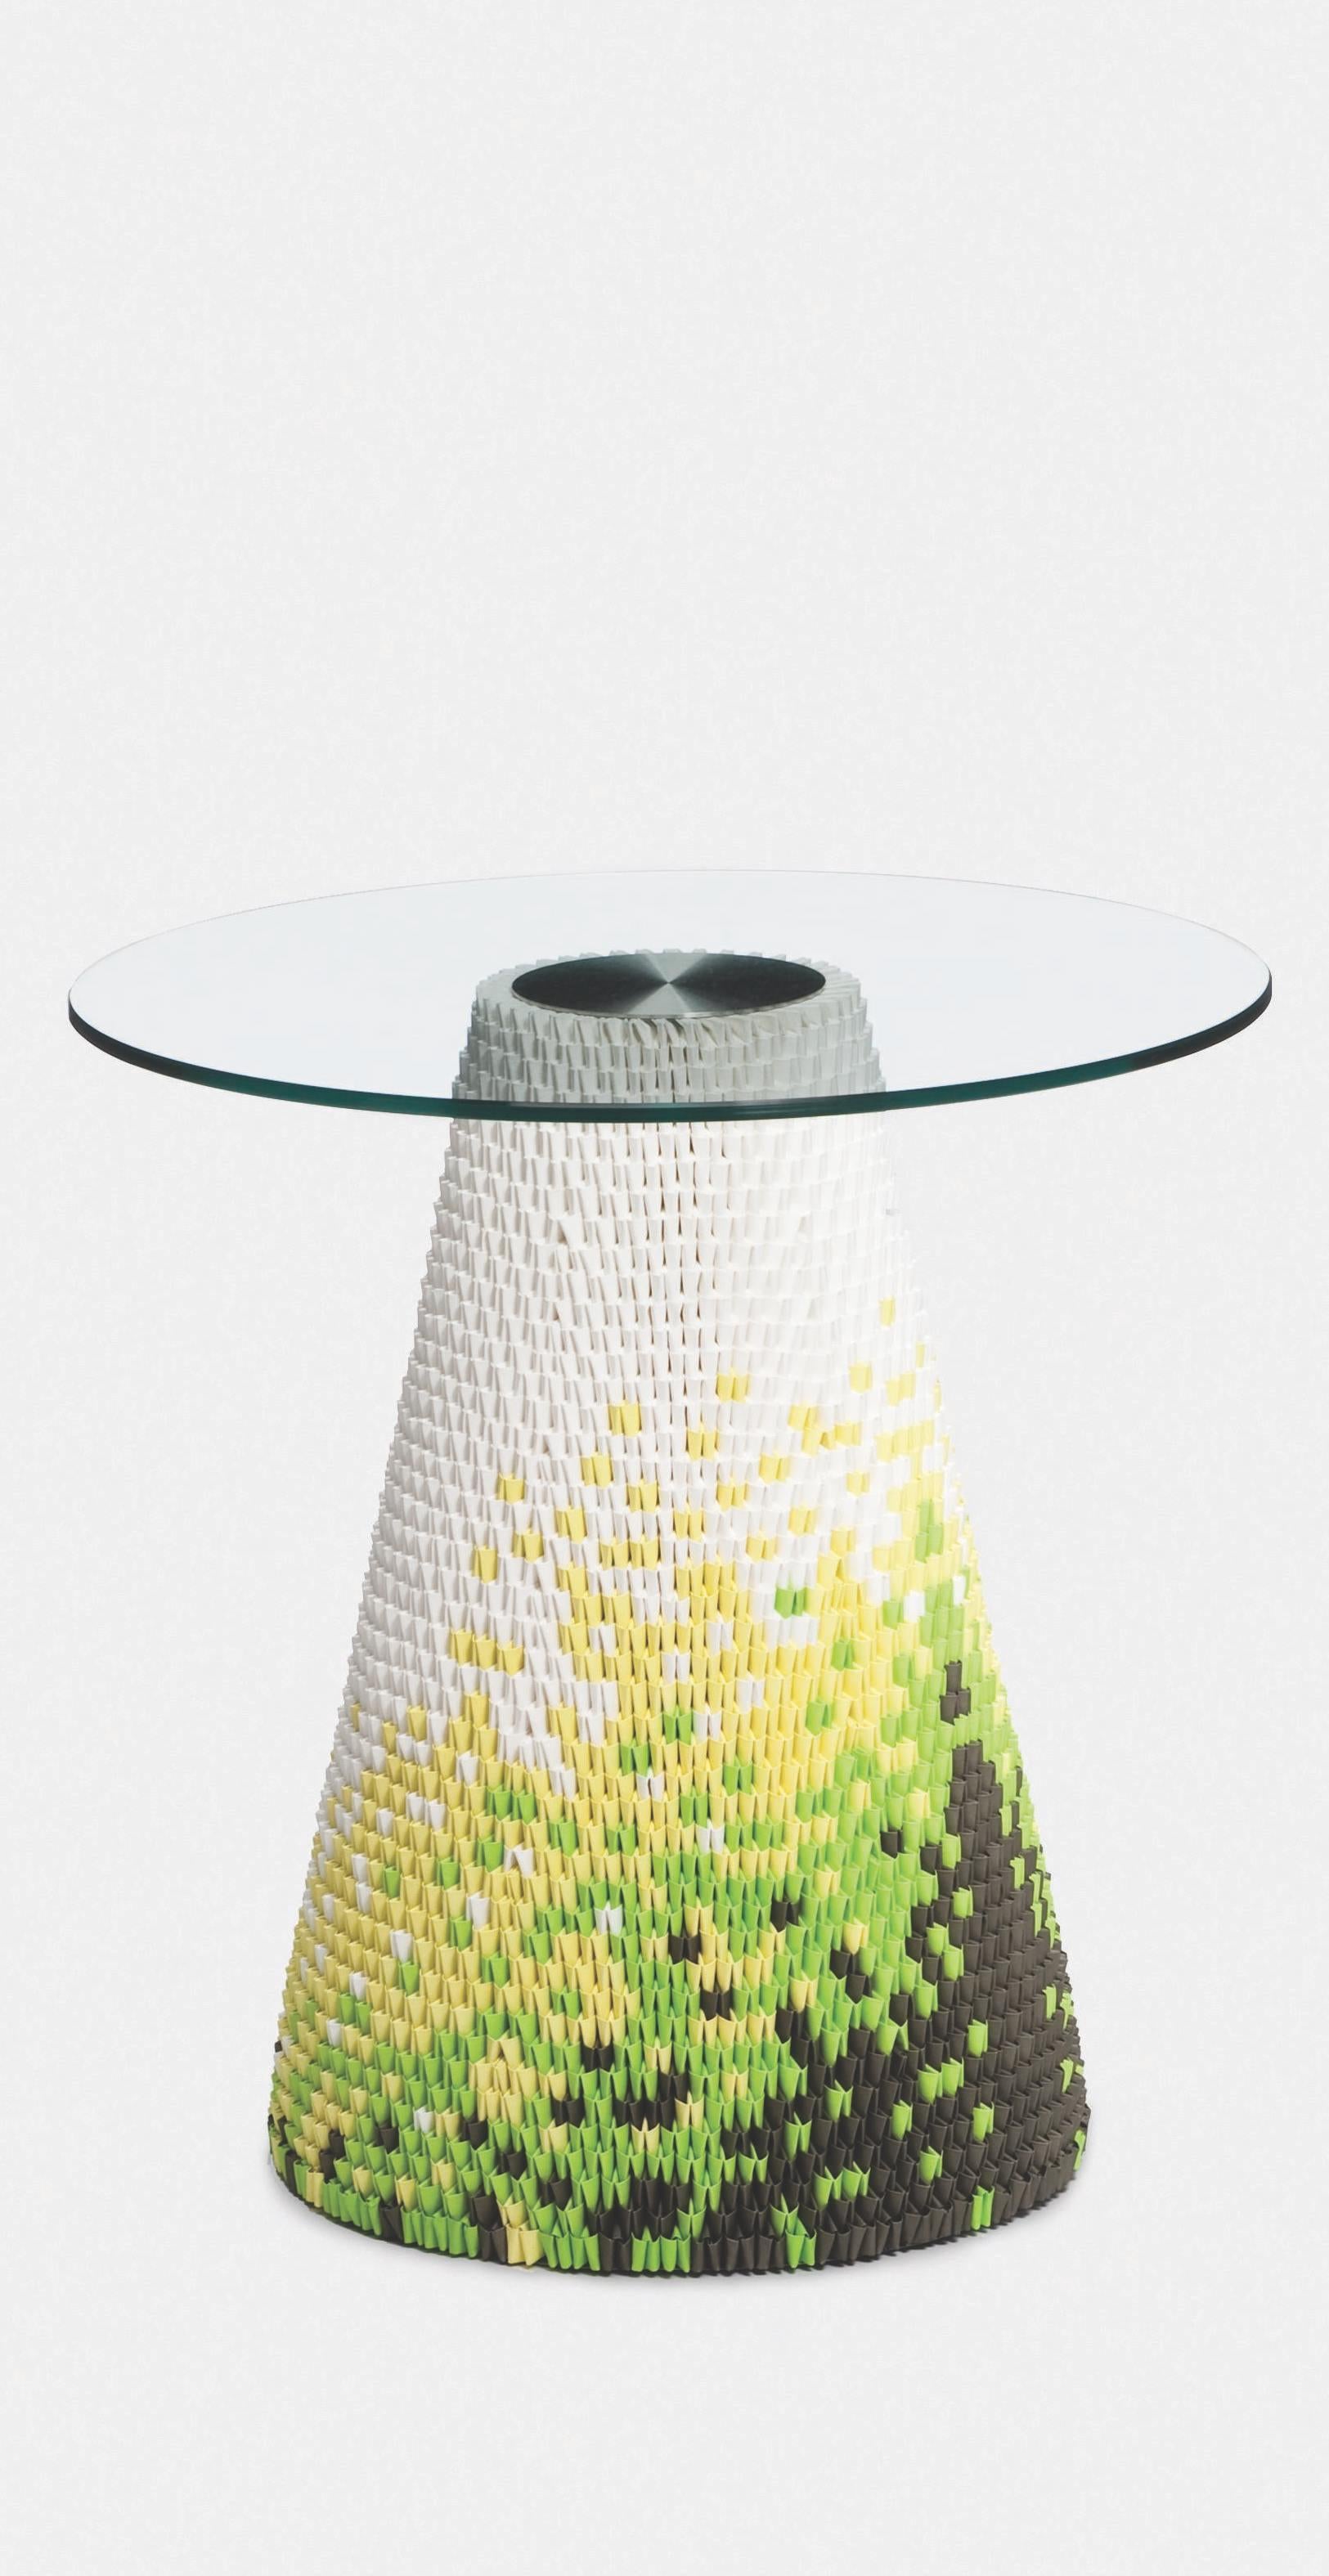 These remarkable glass topped tables utilize a unique and ancient oriental process of interlocking folded paper. Individual paper components knitted together form the table base and create engaging visual patterns and textures whilst also providing